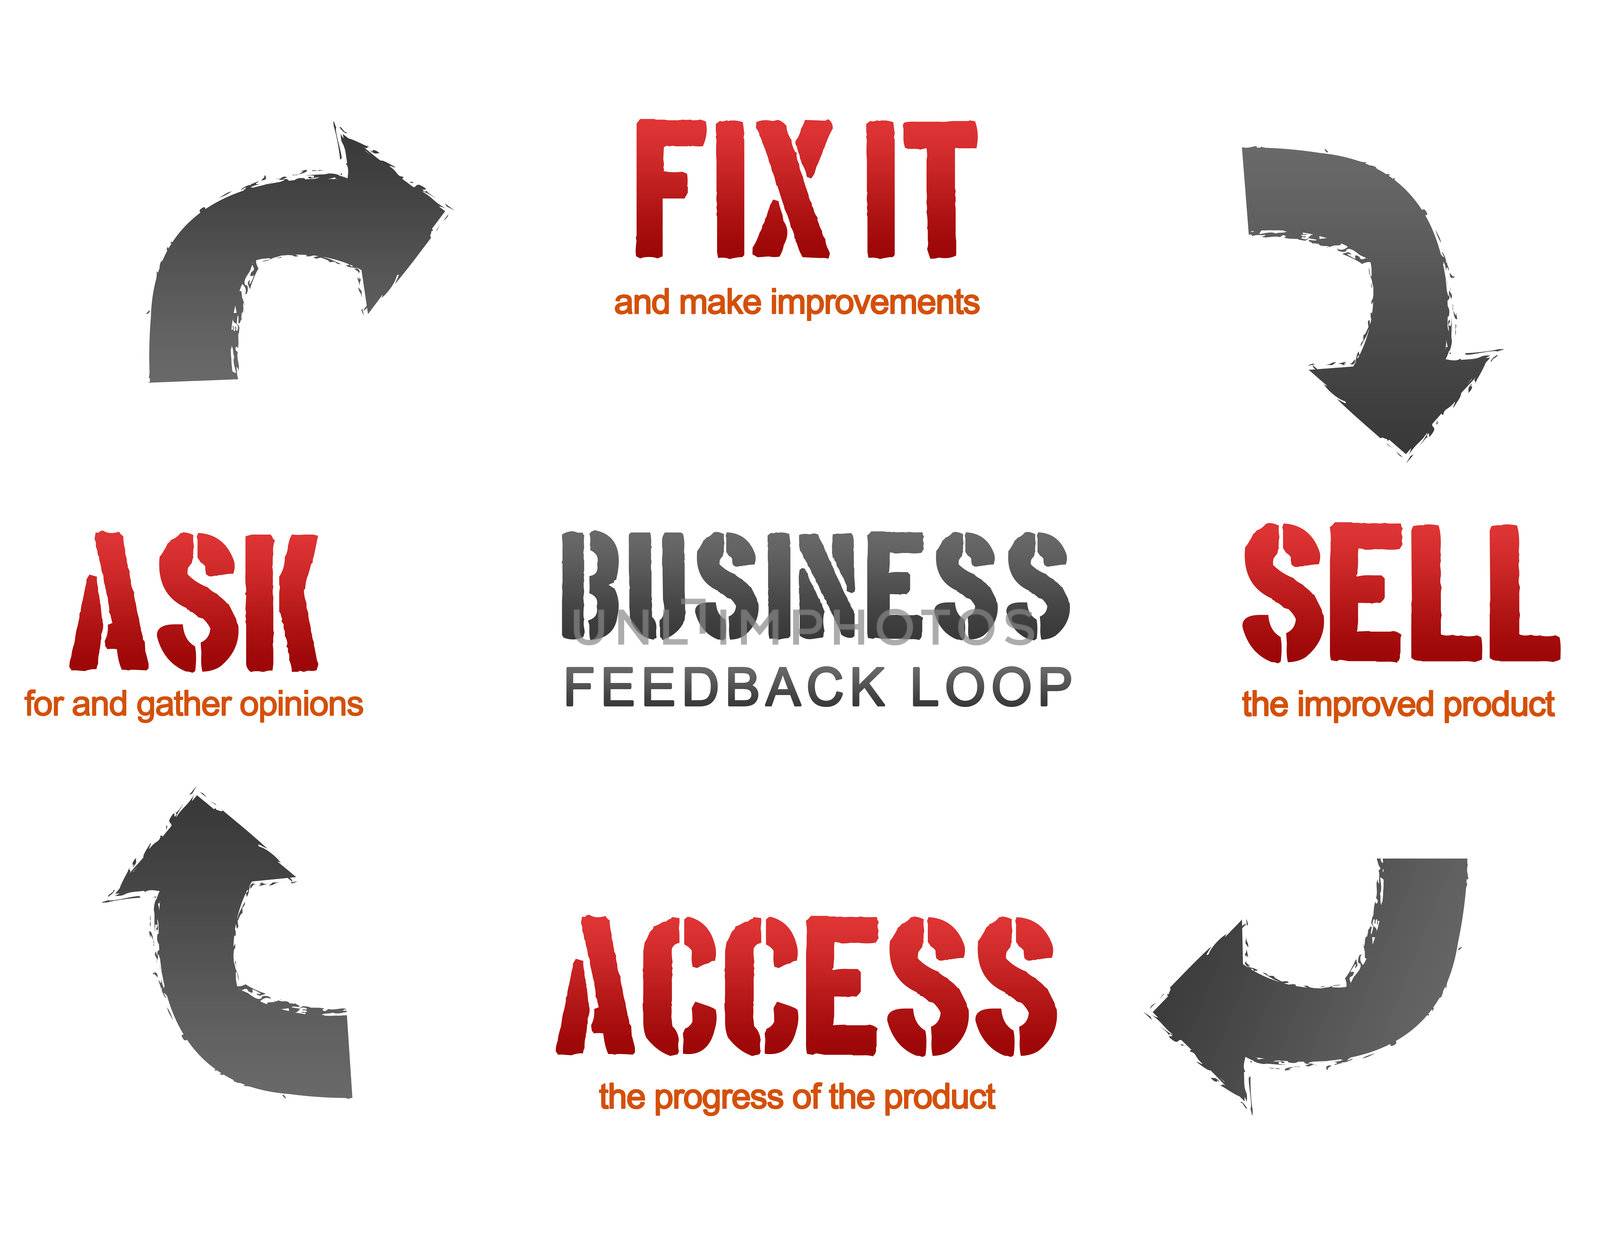 High resolution business feedback loop graphic on white background.